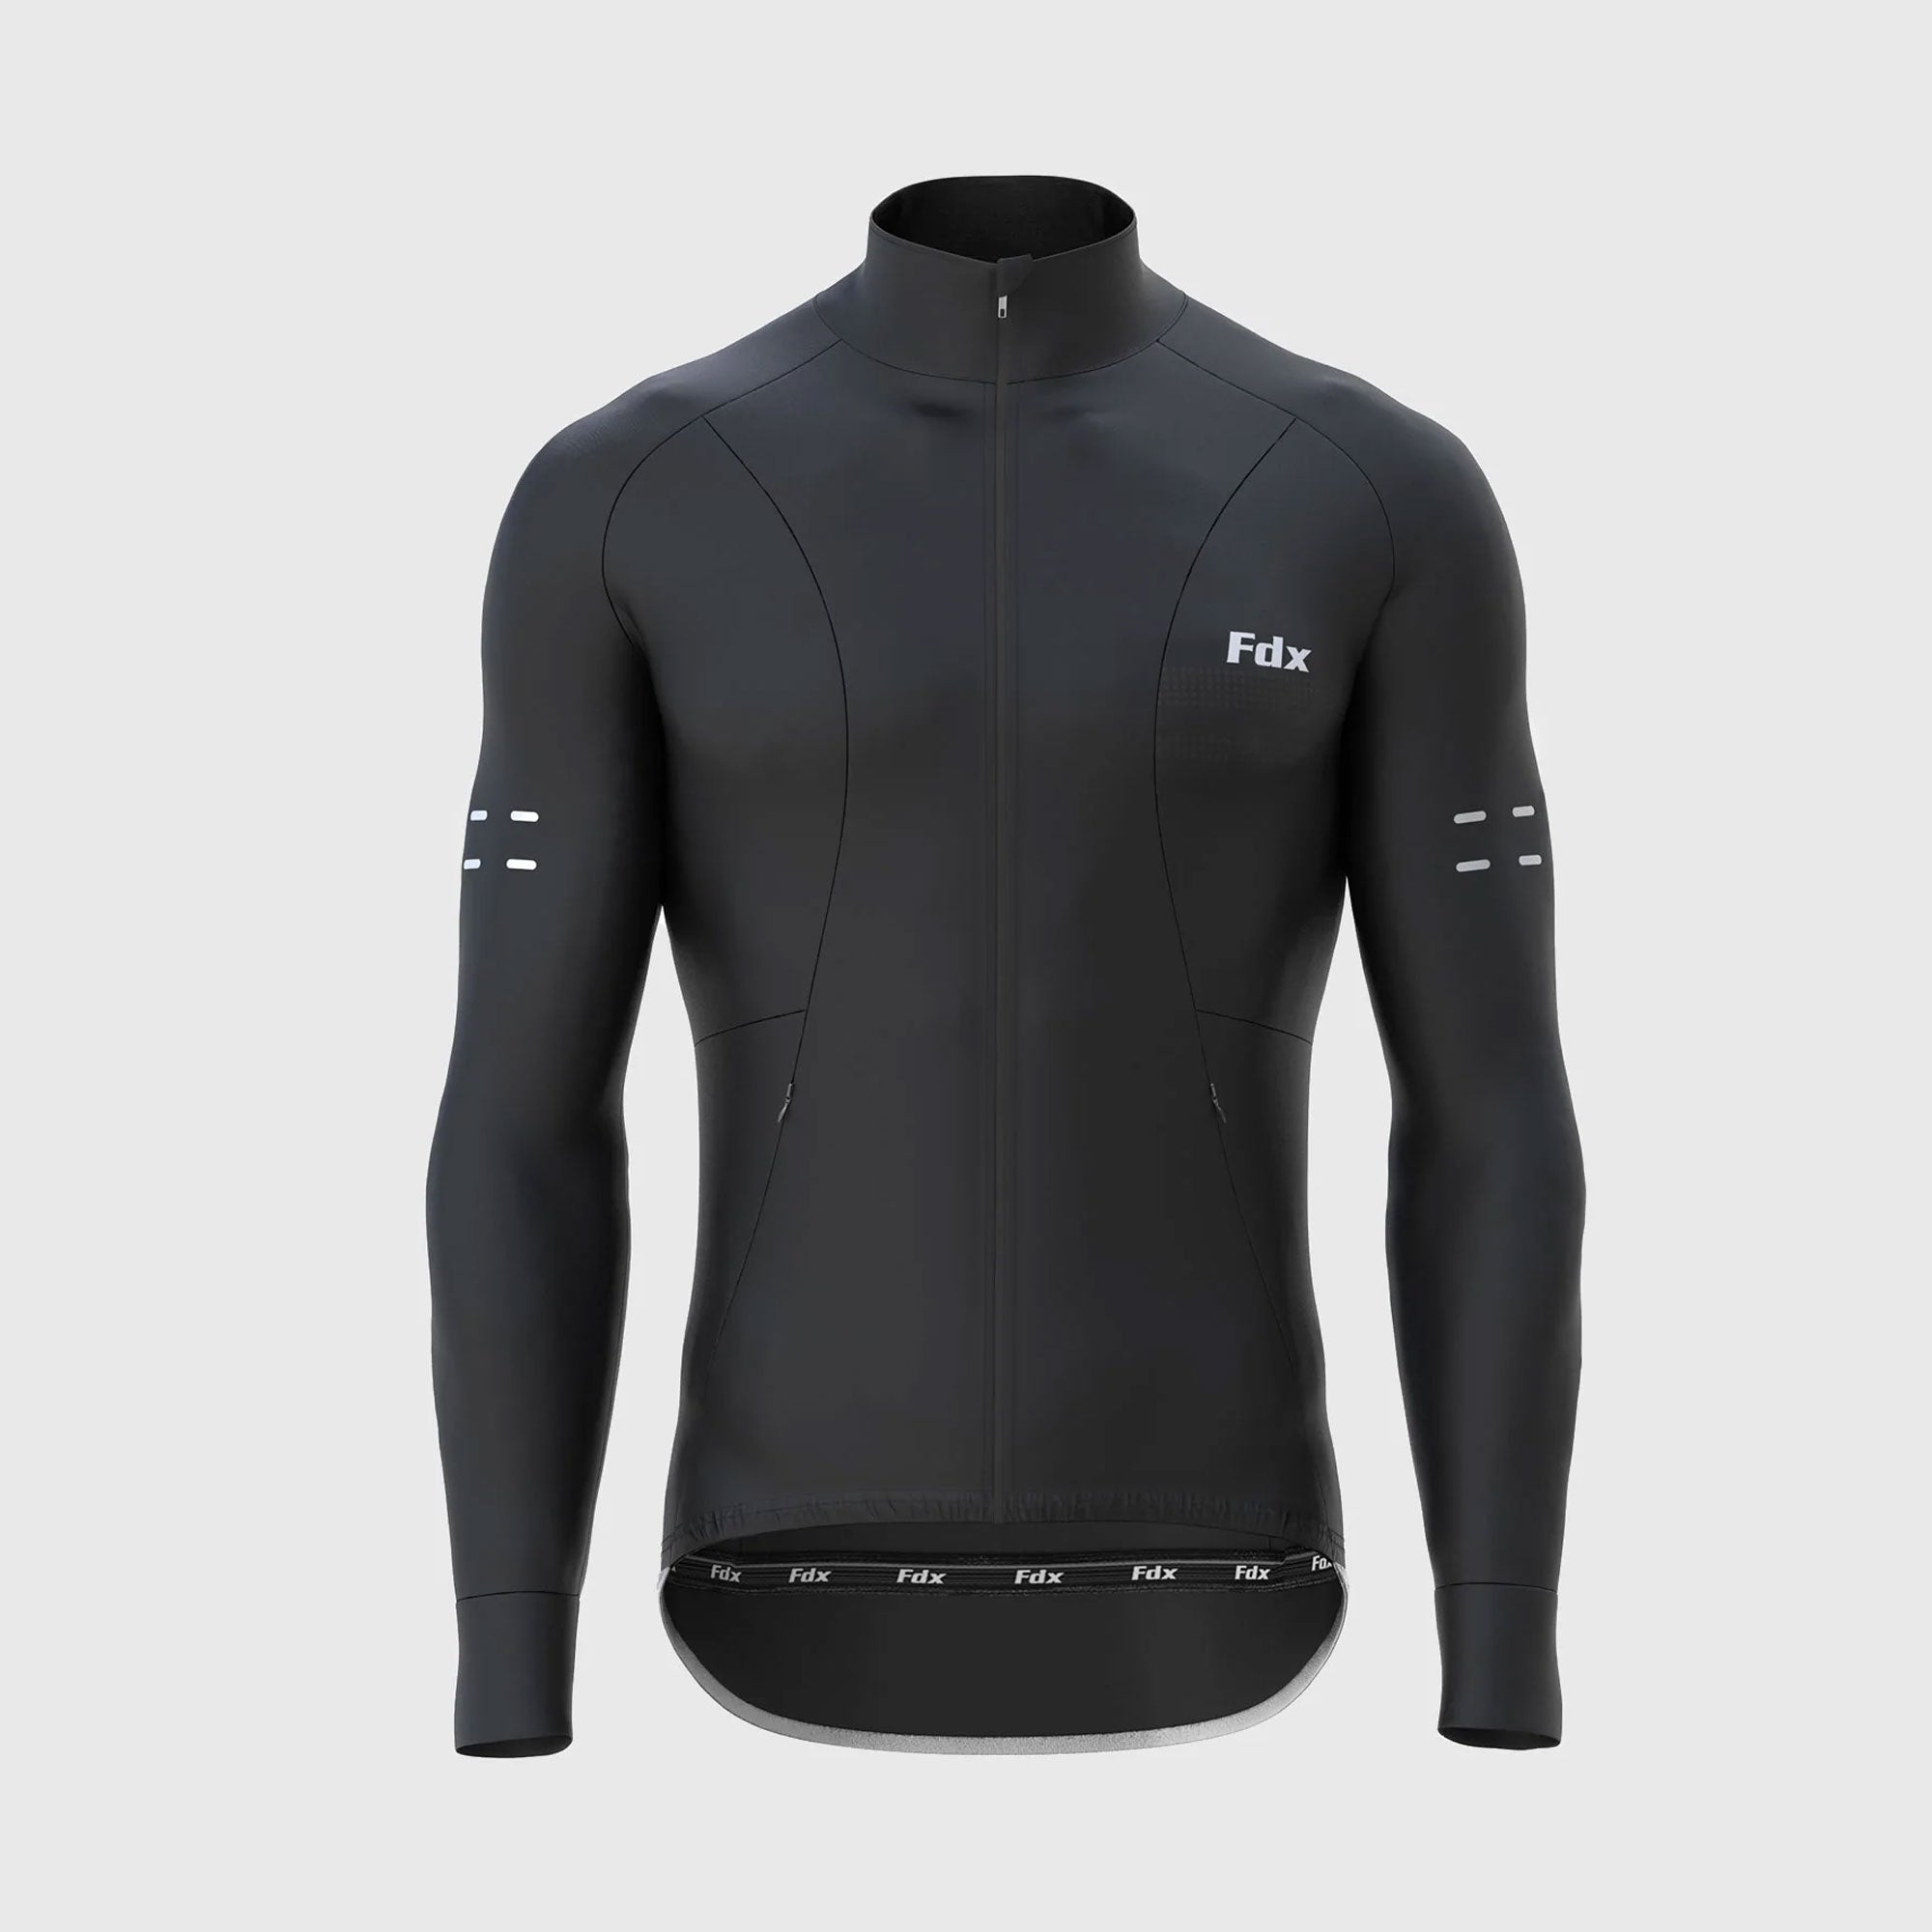 Fdx Arch Men's Black Thermal Long Sleeve Cycling Jersey